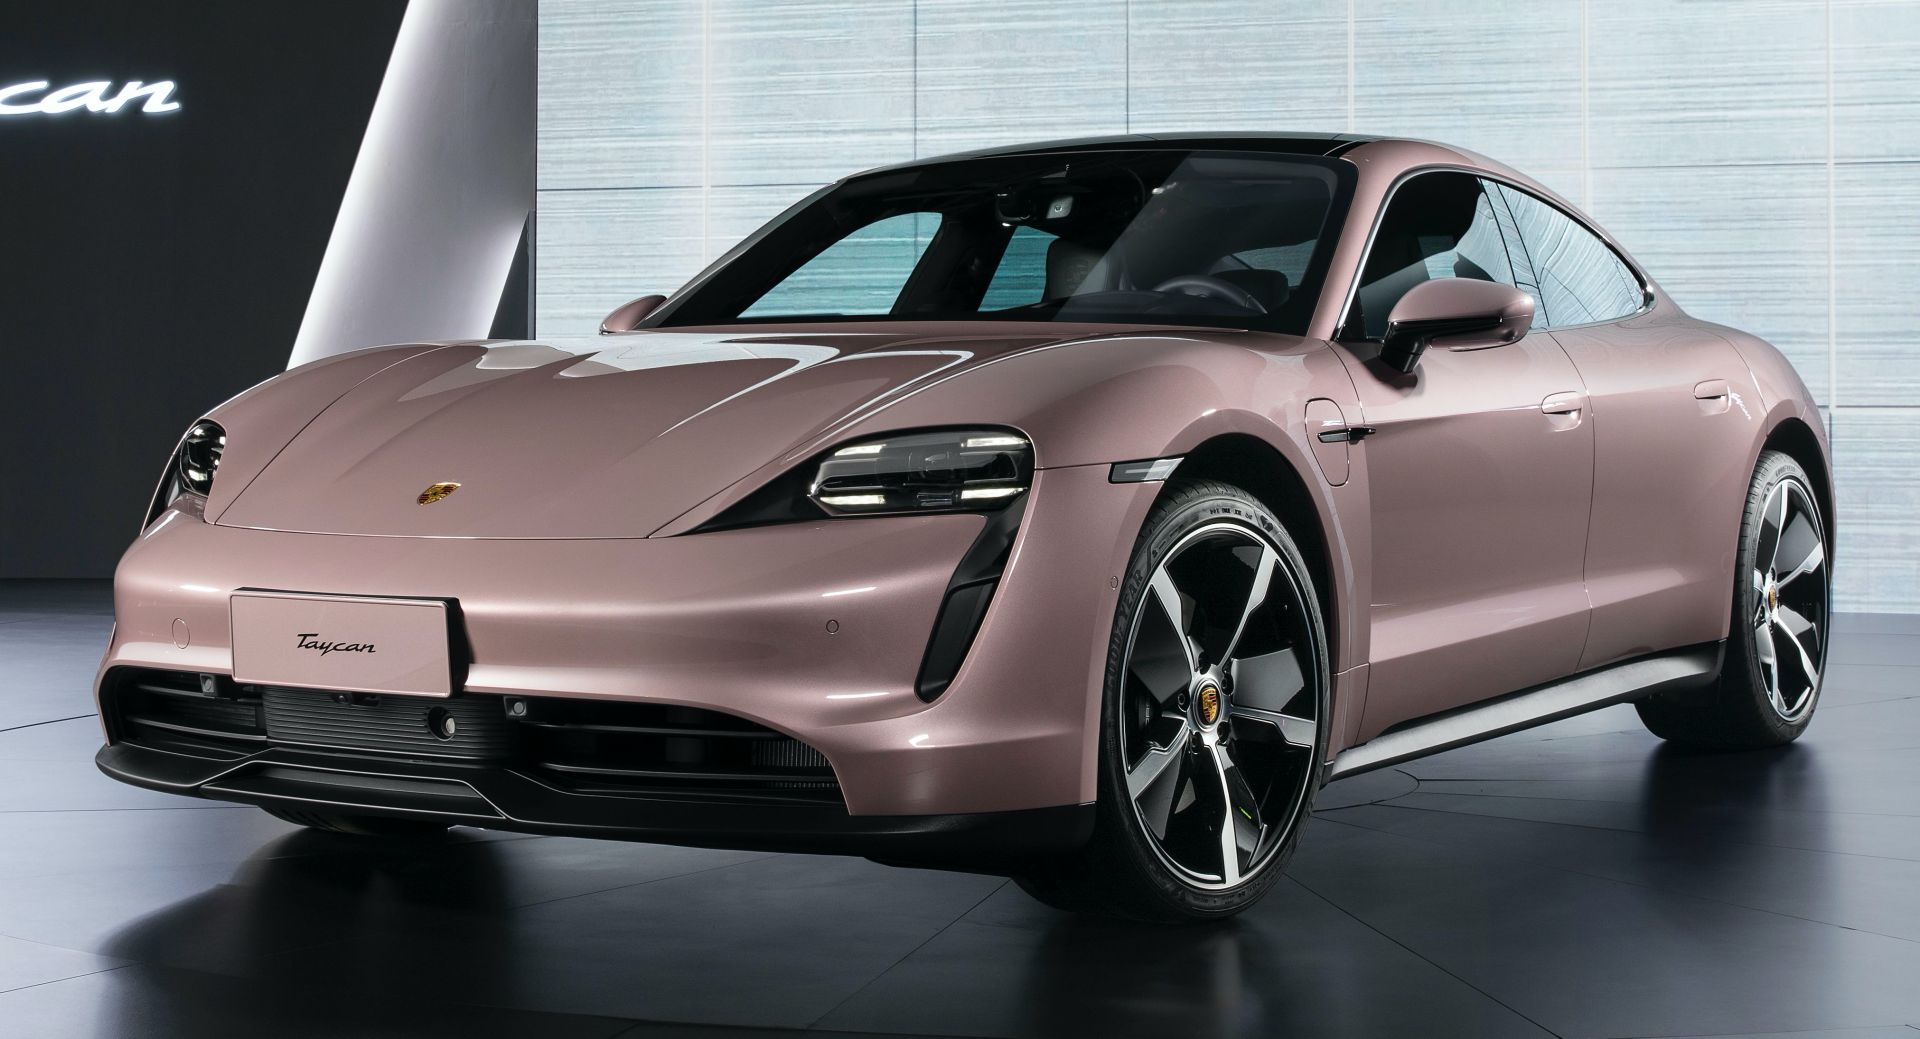 New Base RWD Porsche Taycan Debuts In China With Up To 303